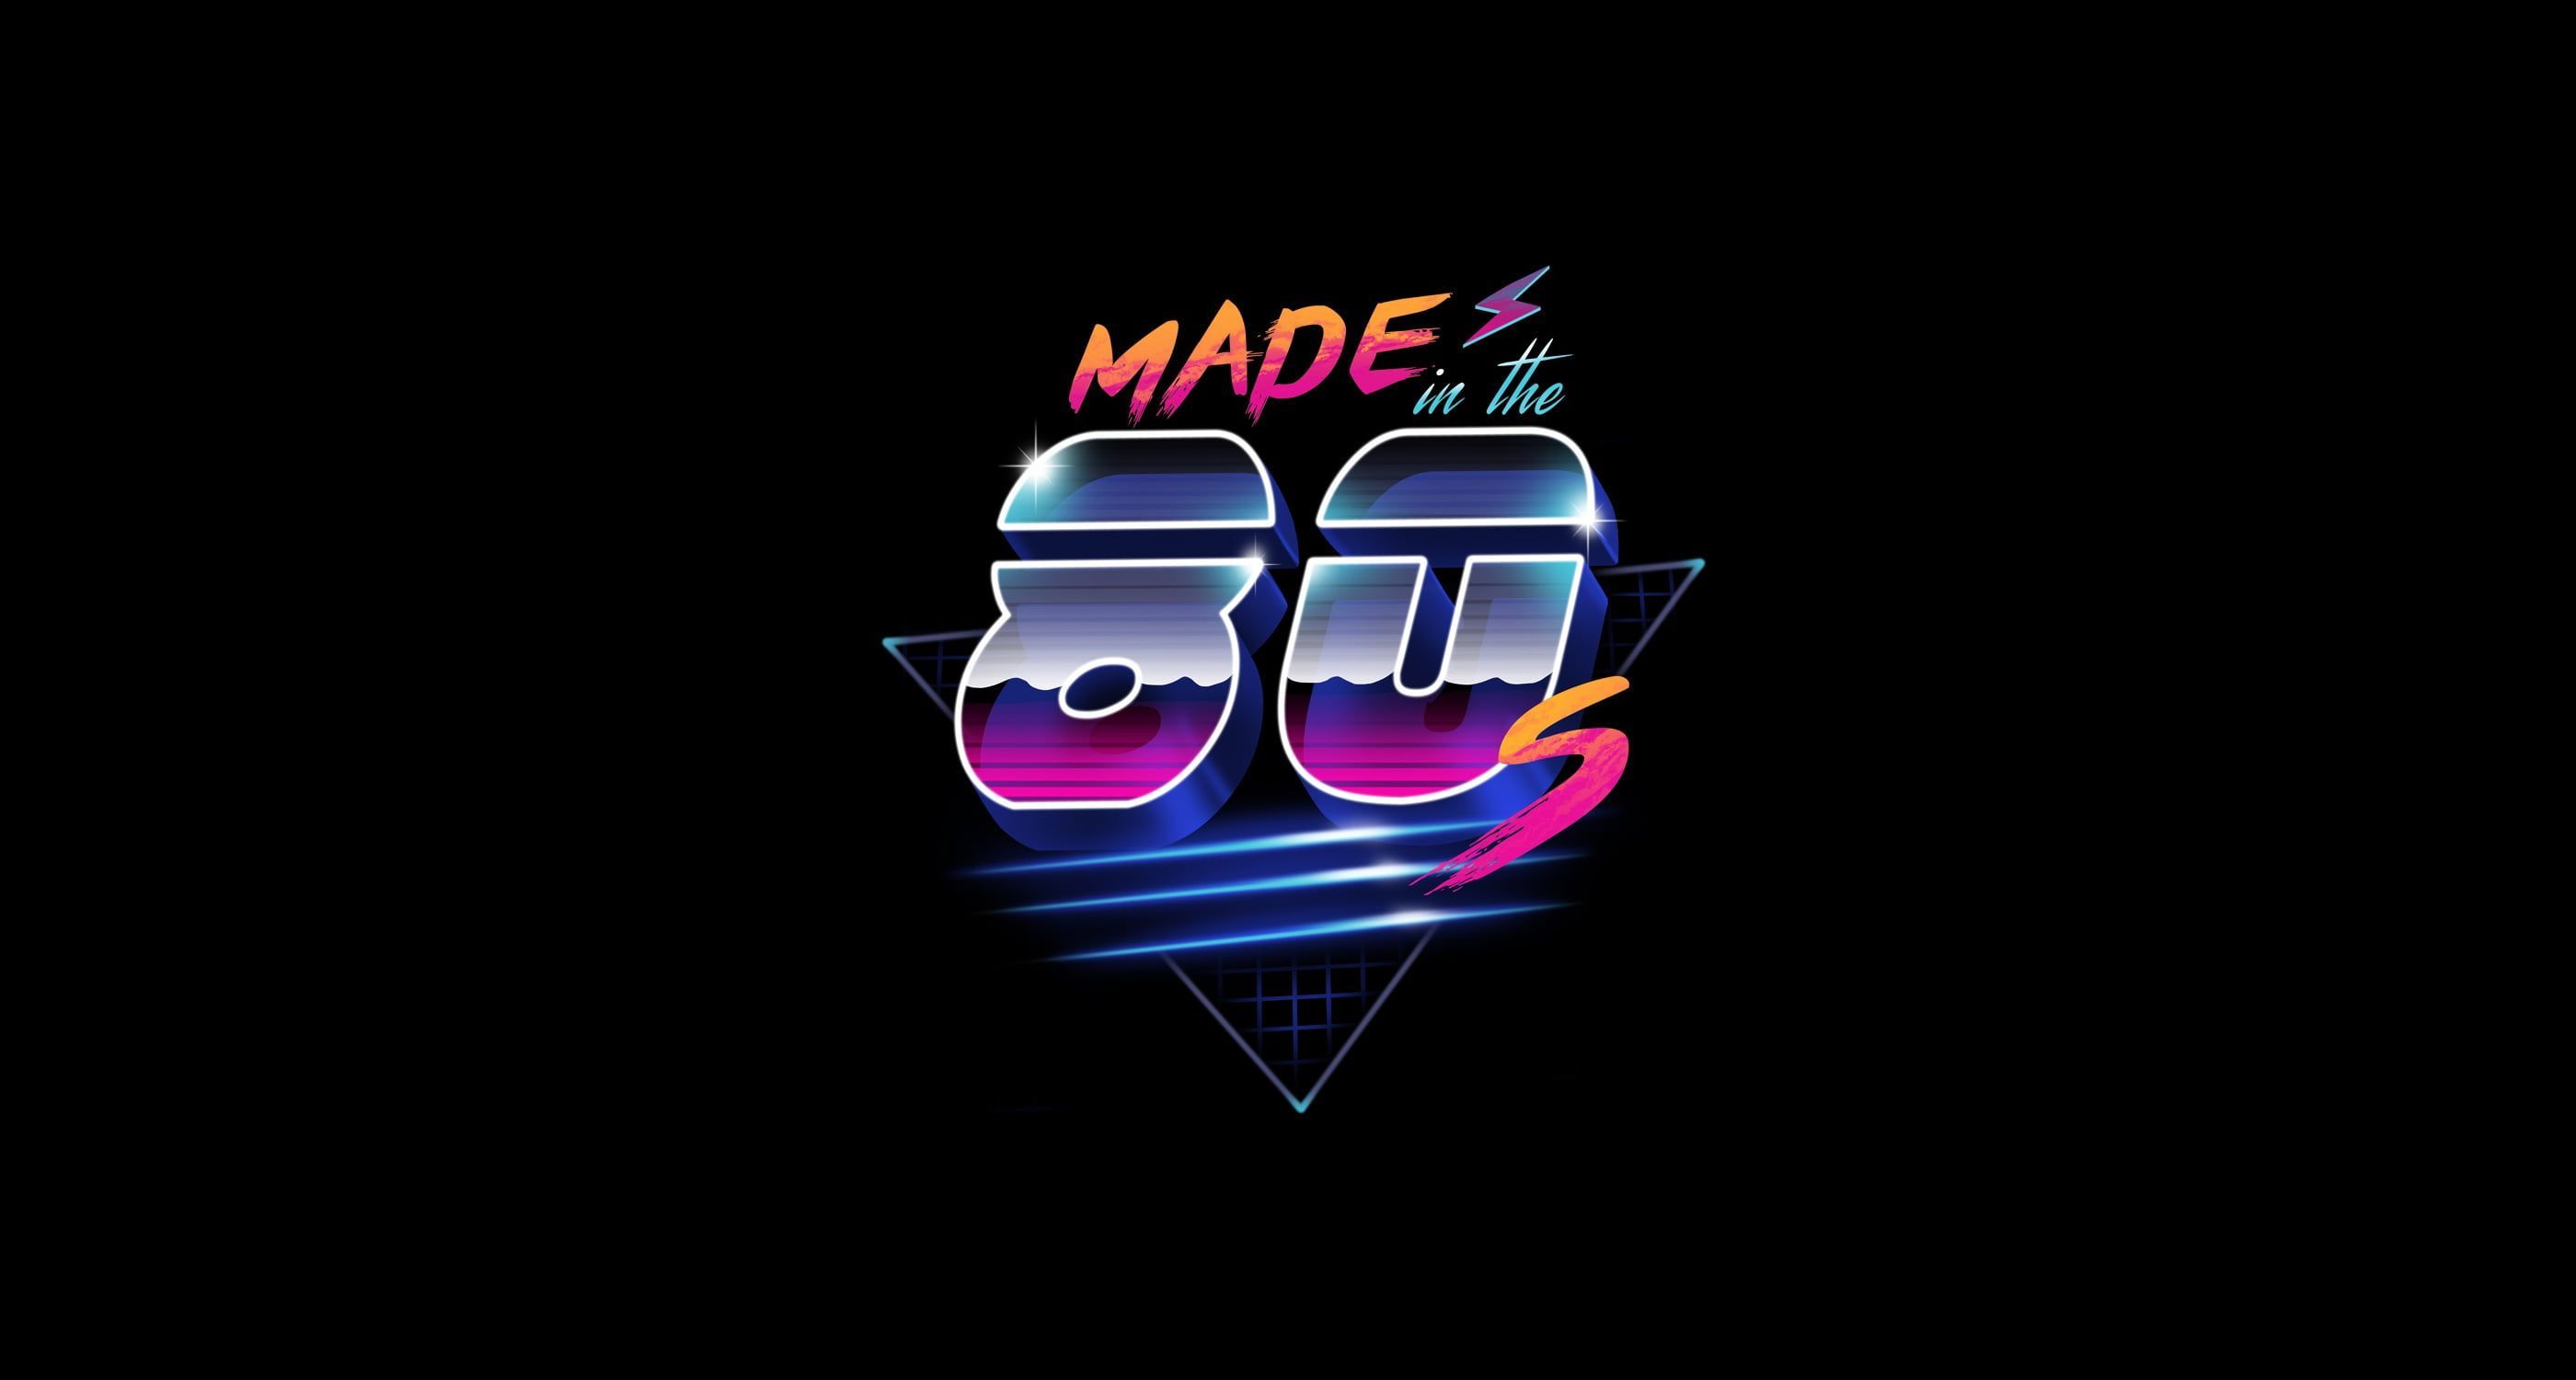 Minimalism #Background s #Neon 's #Synth #Retrowave